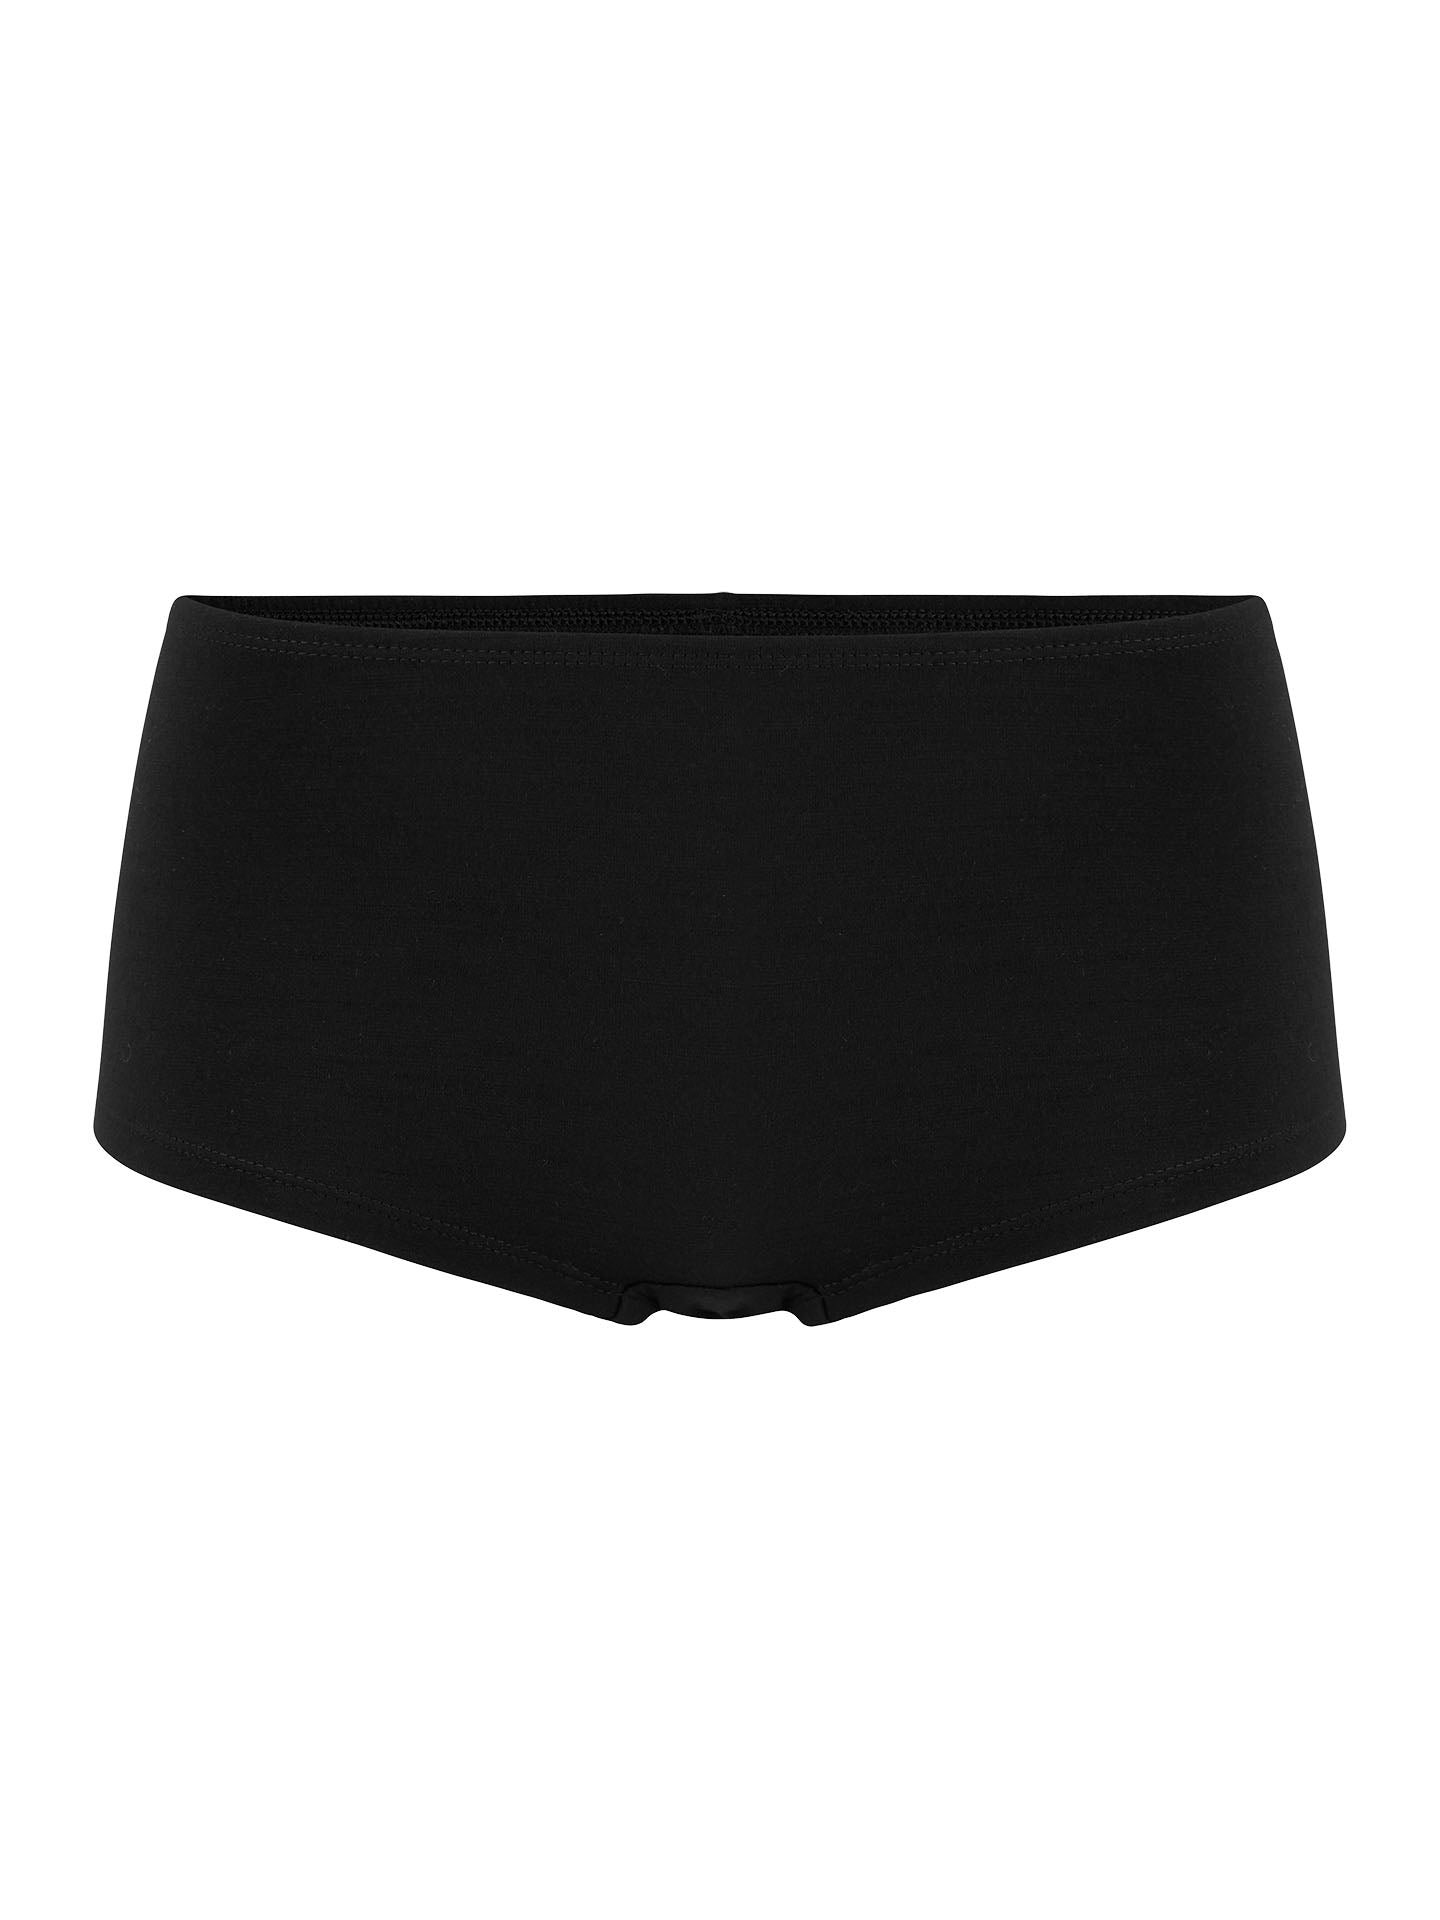 Size Small Black Merino Wool Hipster Brief Size Small Ready to